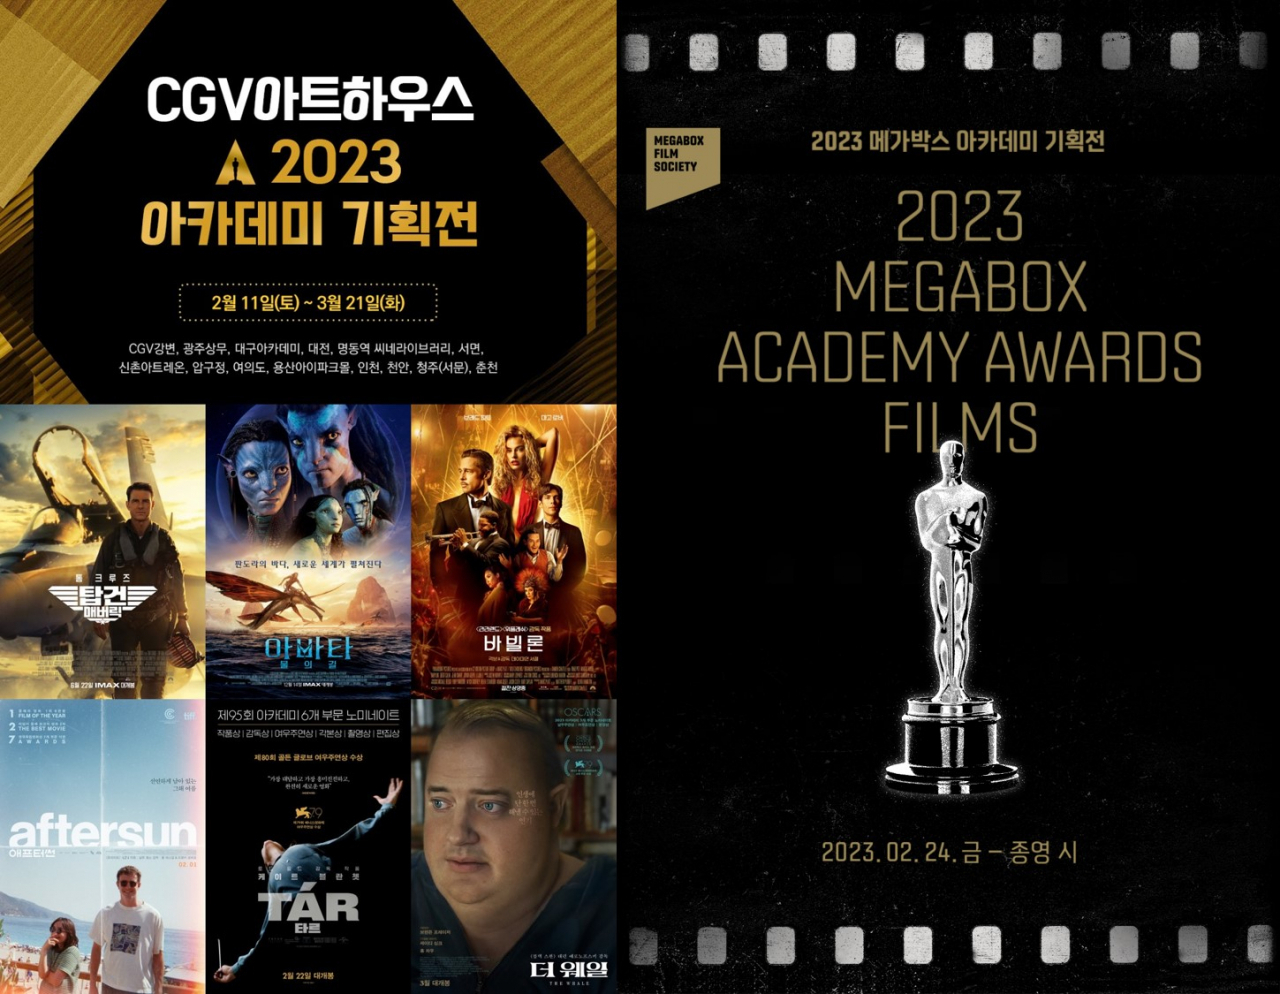 Poster images from CJ CGV (left) and Megabox promoting special screening events for the 95th Academy Awards. (CJ CGV, Megabox)